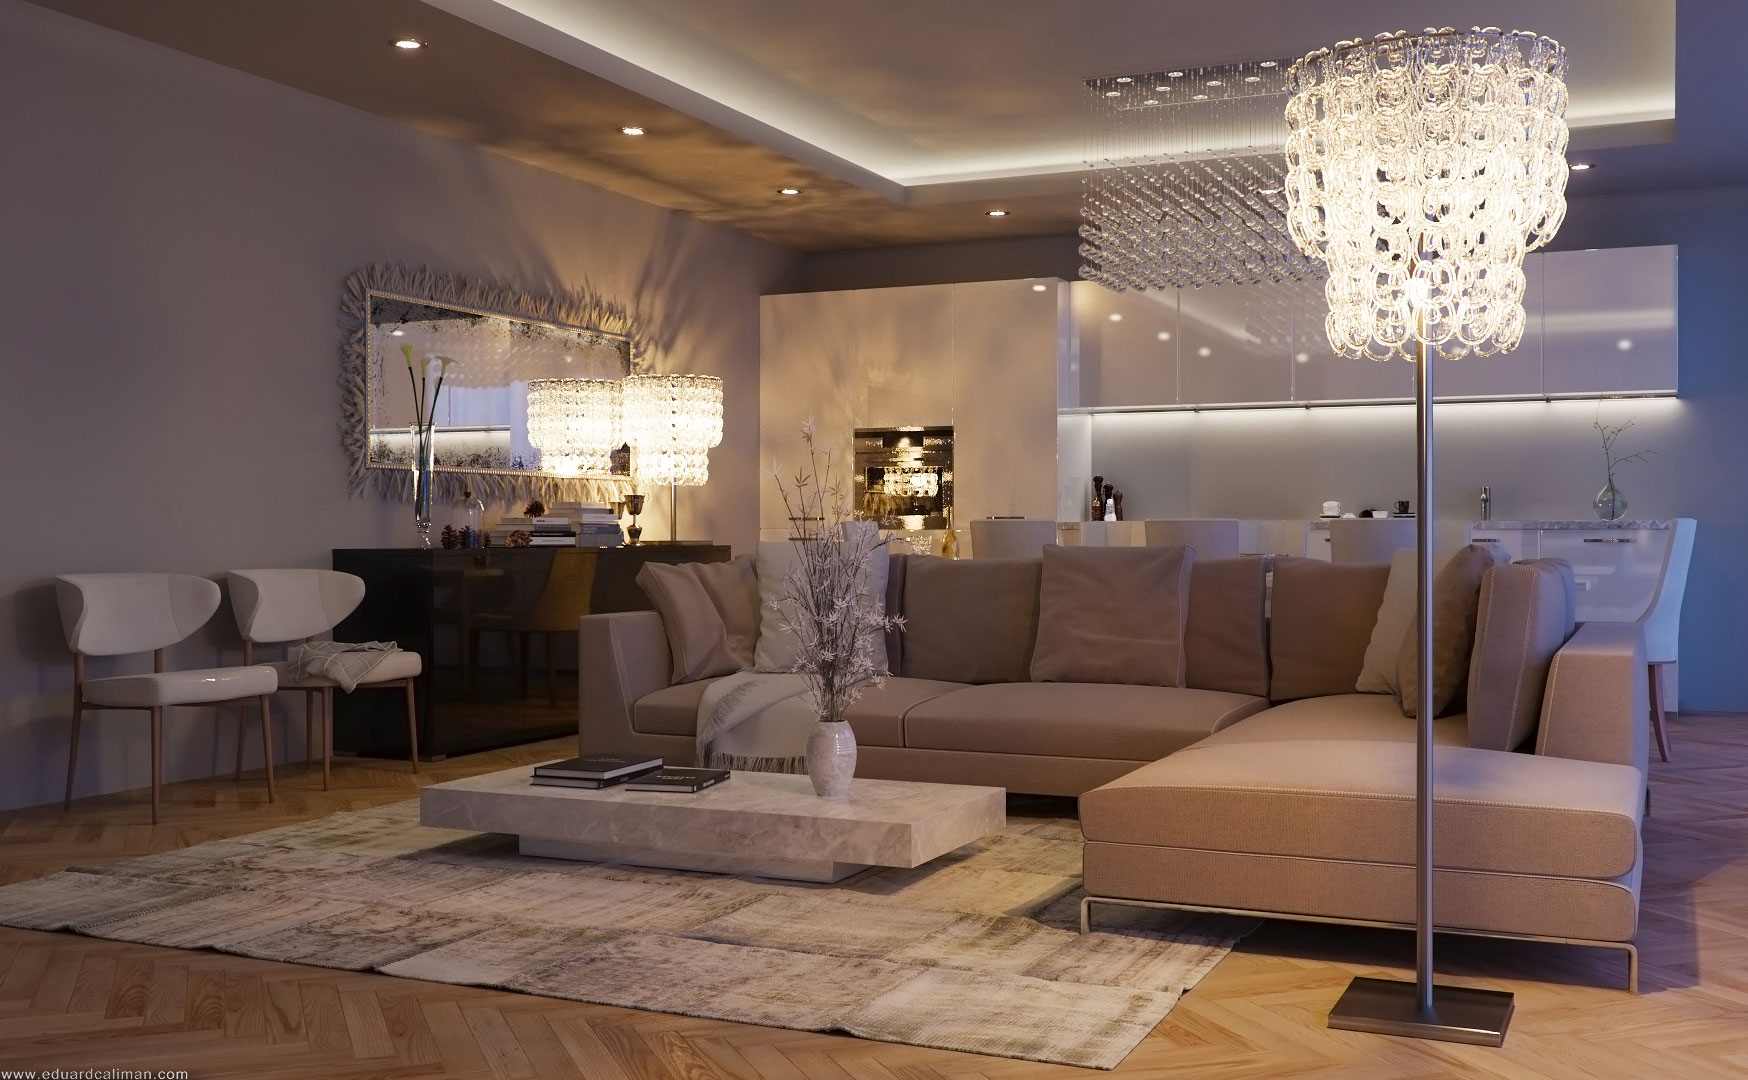 Project Design With Cool Project Design Caliman Eduard With Sparkling Chandelier And LED Light Sectional Sofa Marble Coffee Table Wood Floor Minimalist Cabinet Decoration Luxury Living Room In Elegant Contemporary Style